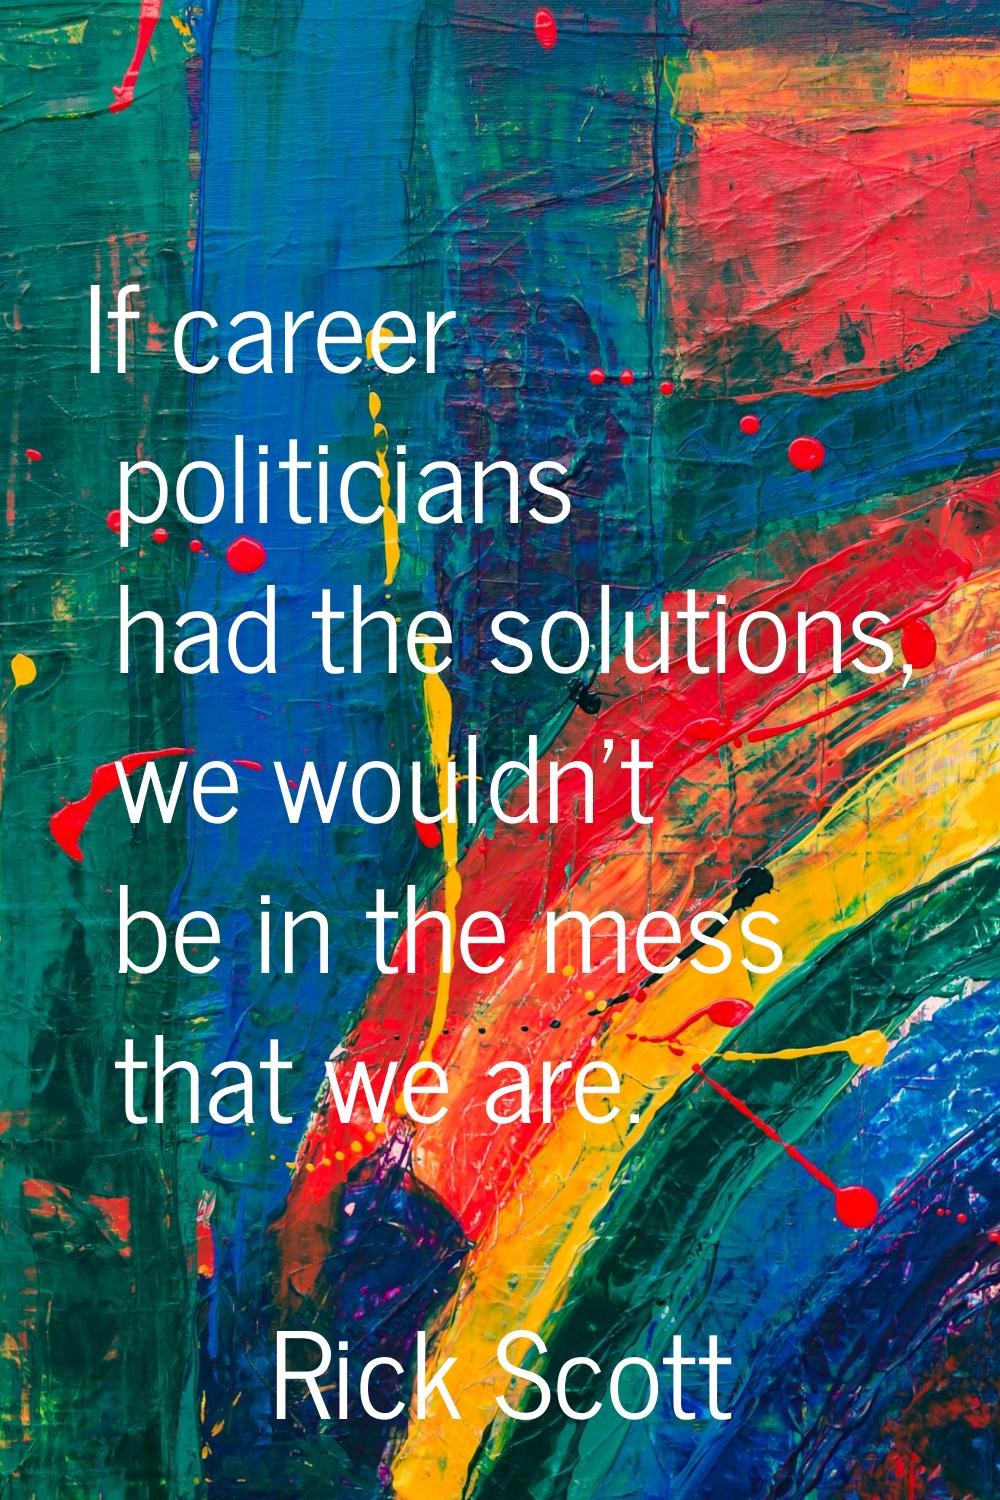 If career politicians had the solutions, we wouldn't be in the mess that we are.